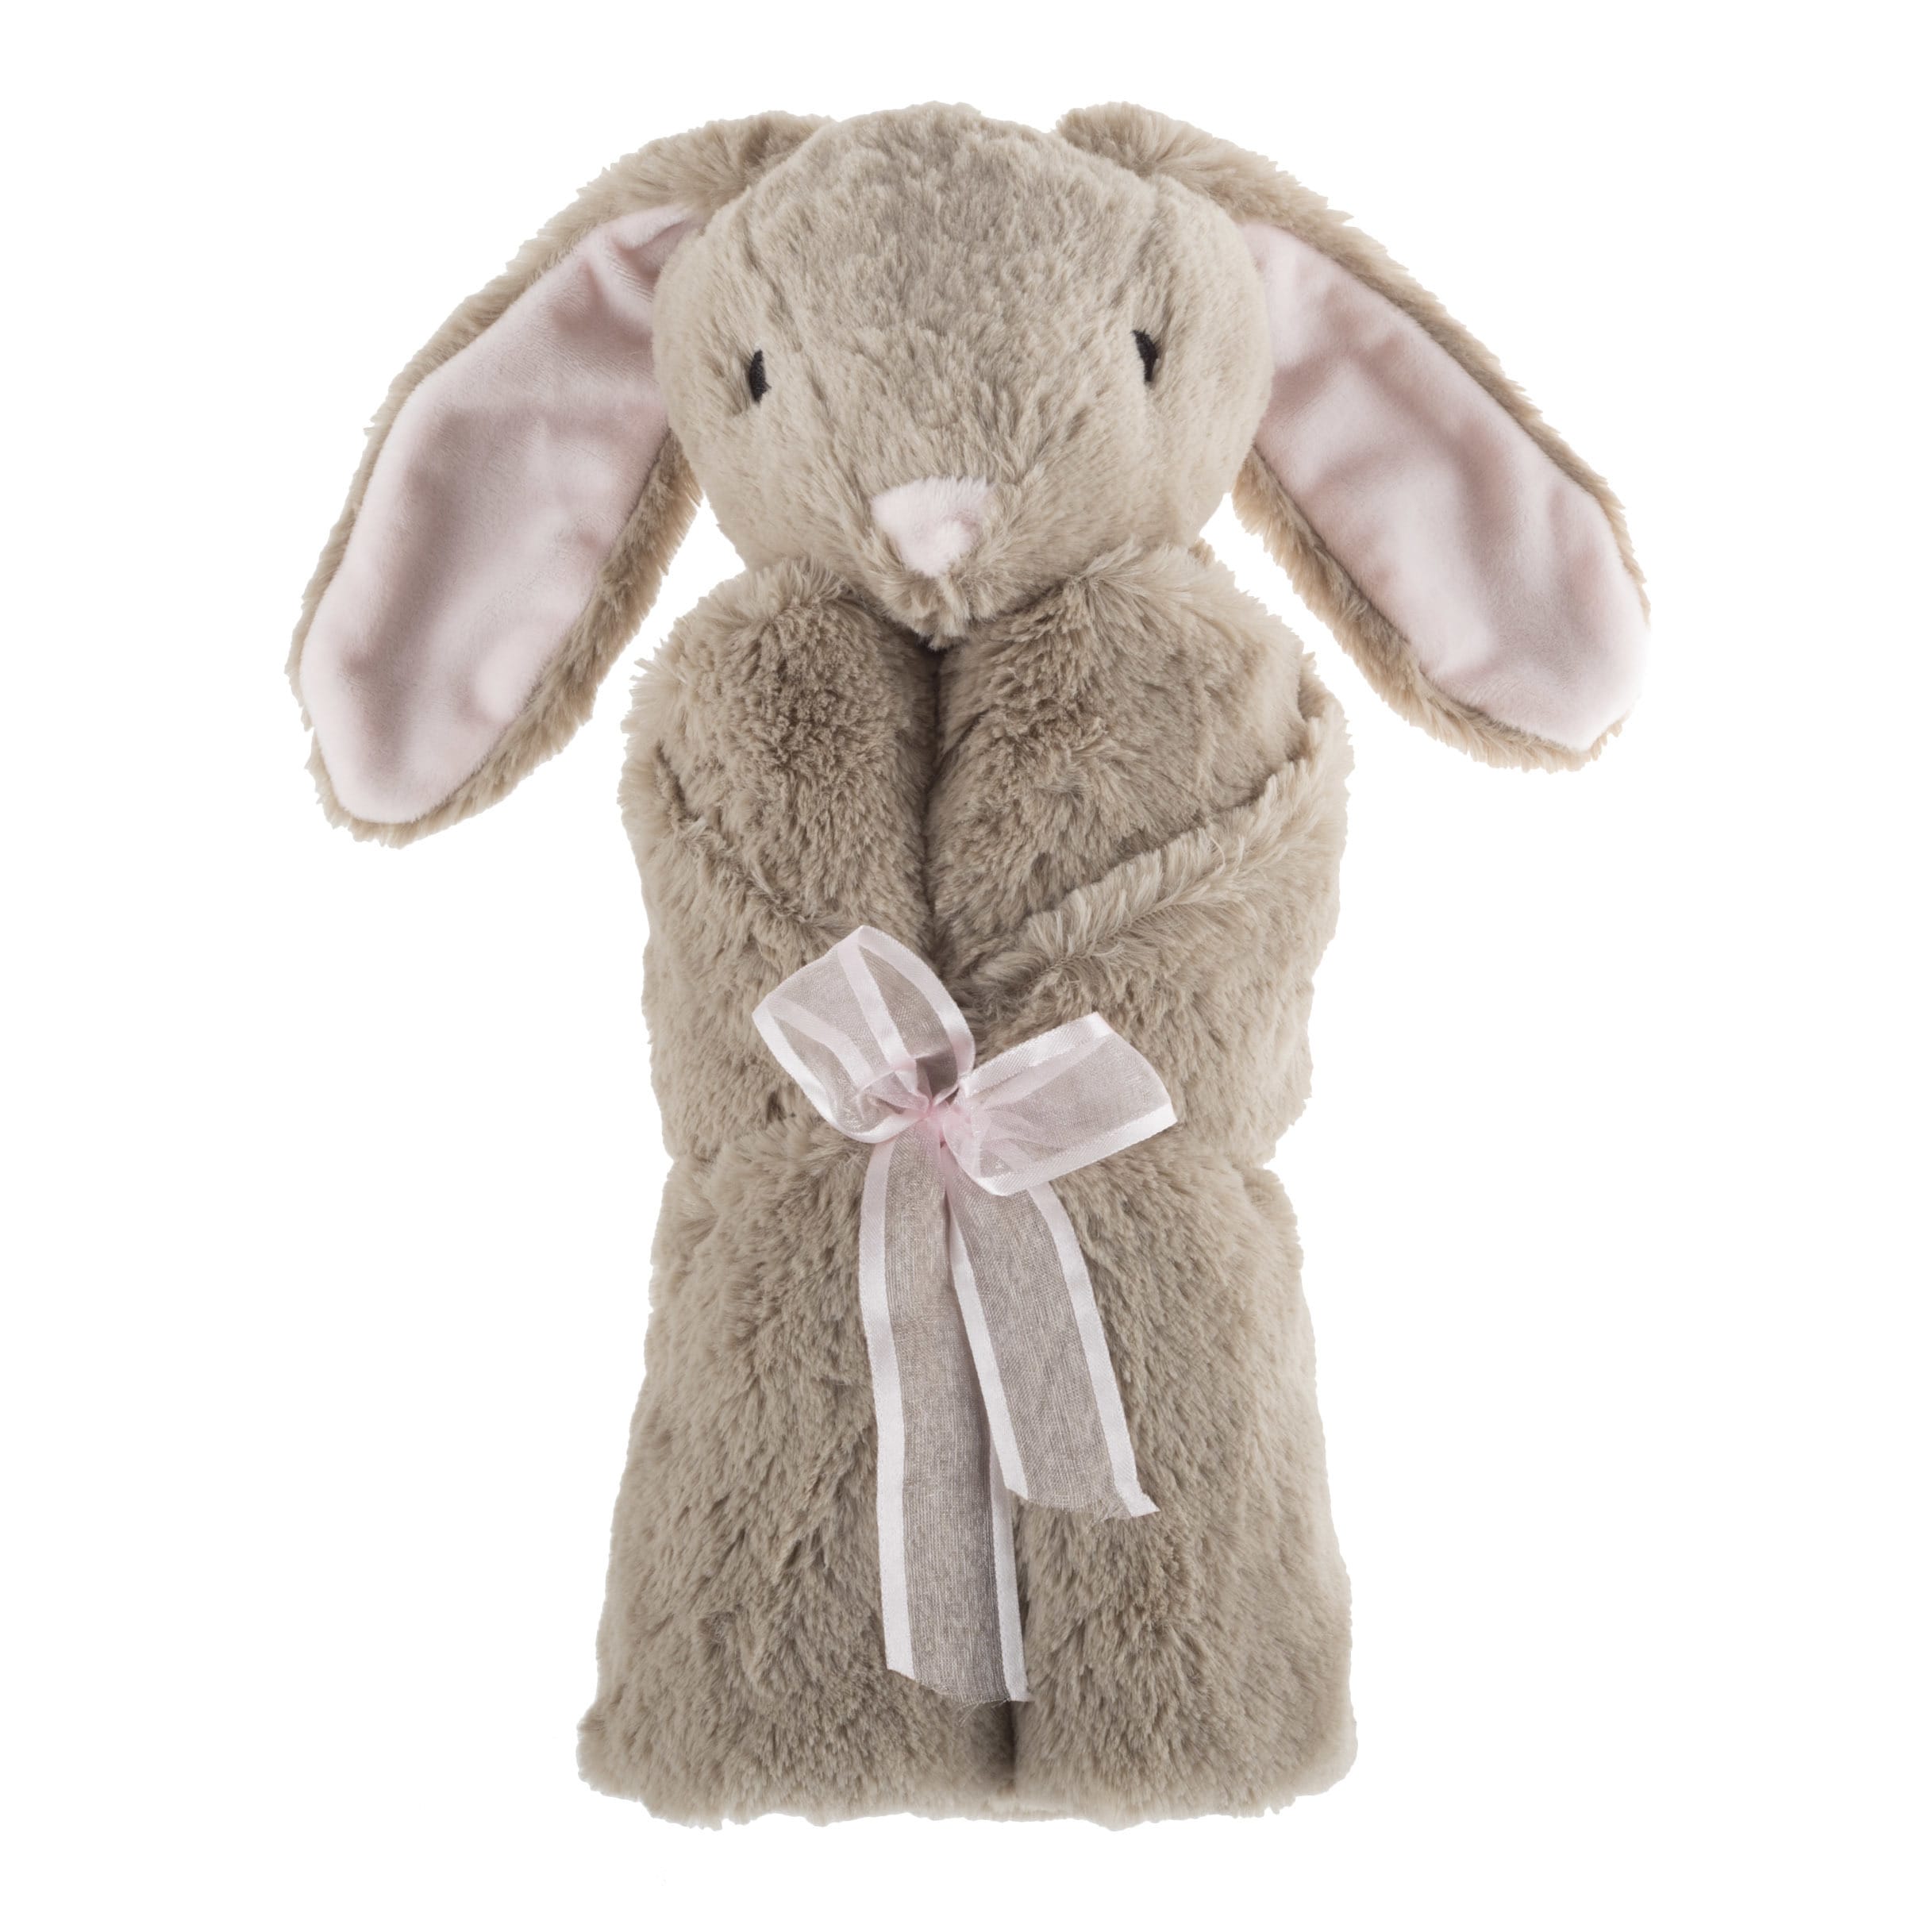 Baby Security Blanket Stuffed Animal Soft And Cuddly For Play On Sale Overstock 20357789 Pink